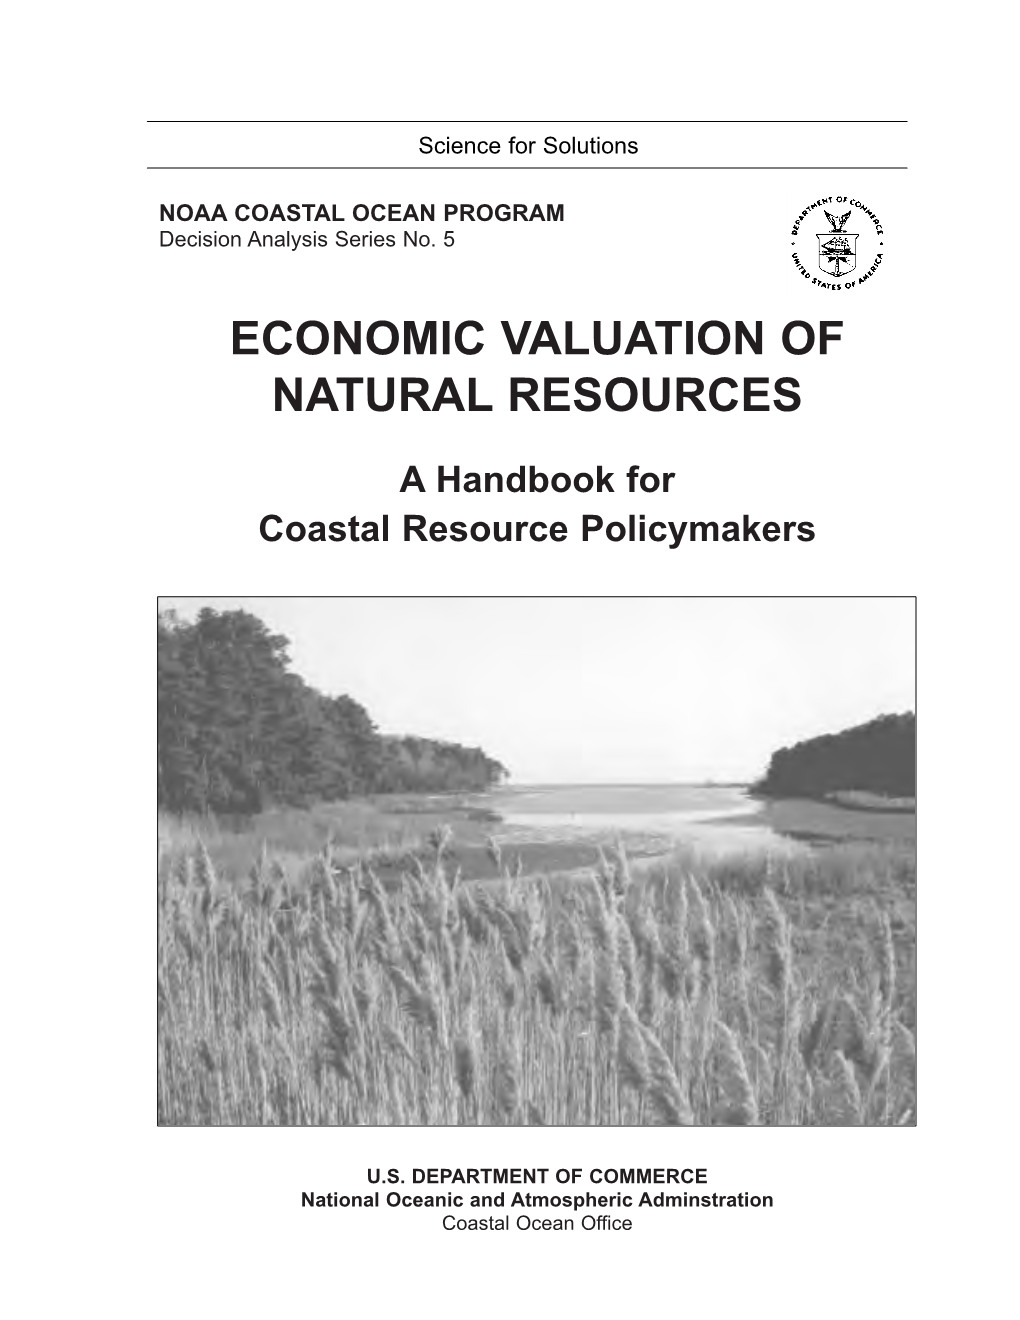 Economic Valuation of Natural Resources